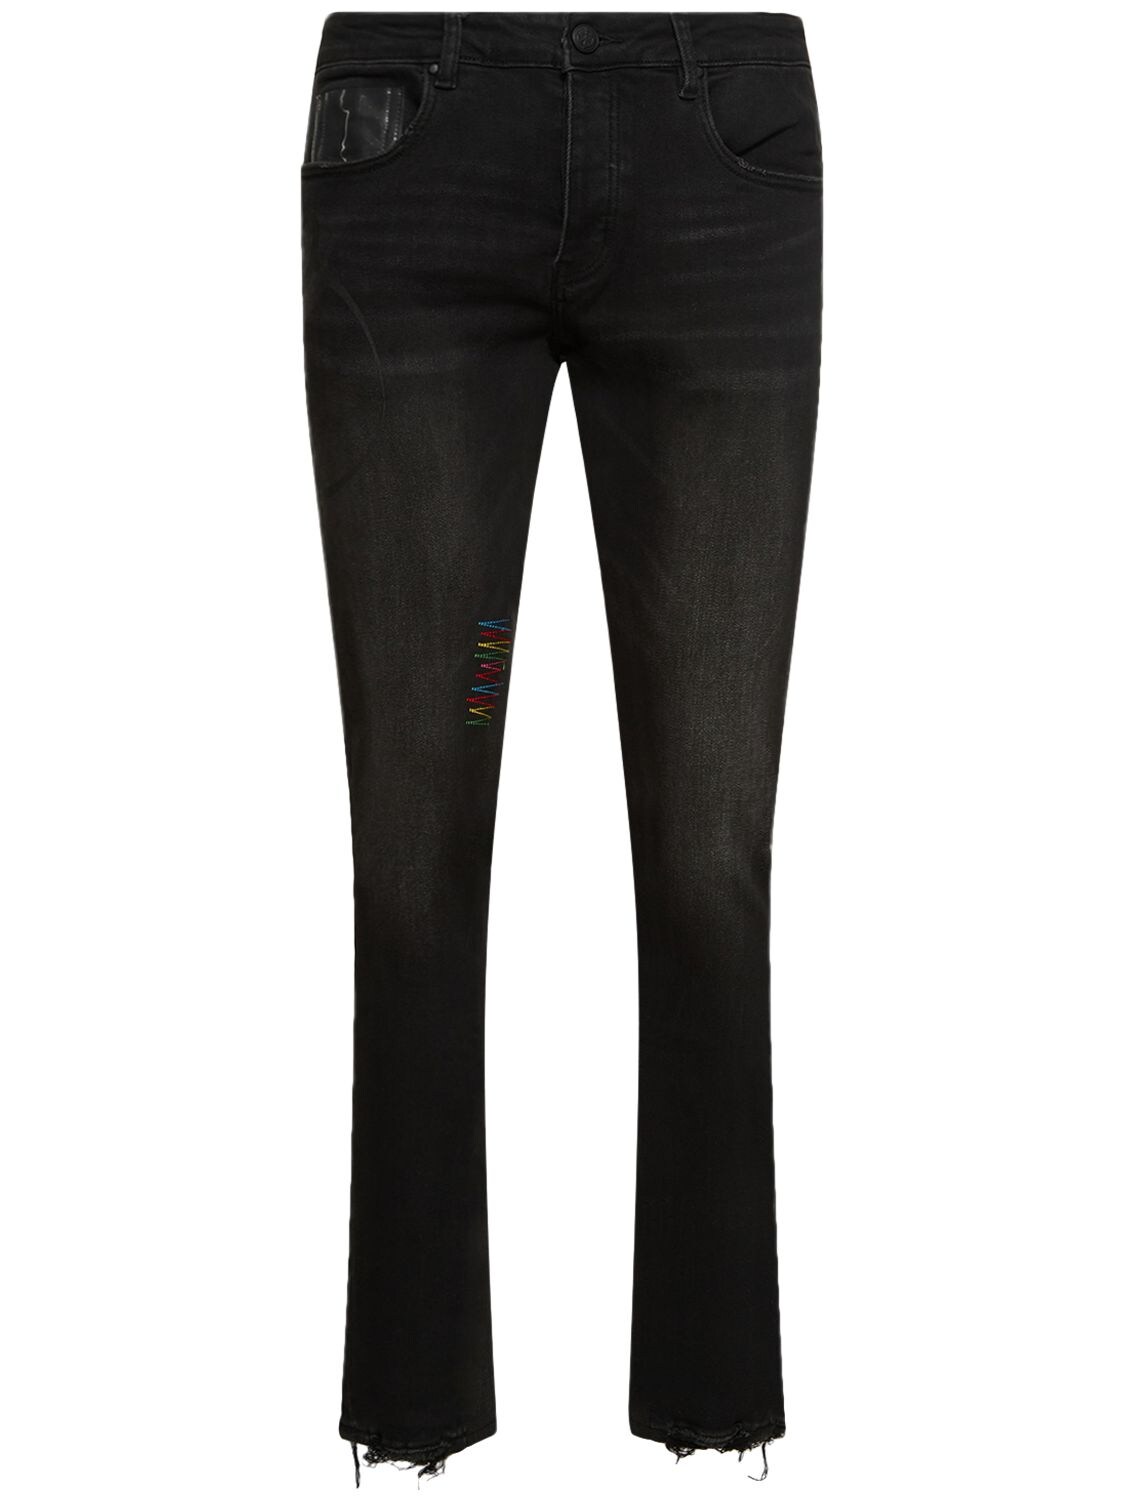 Lifted Anchors Hilton Essential Jeans In Black